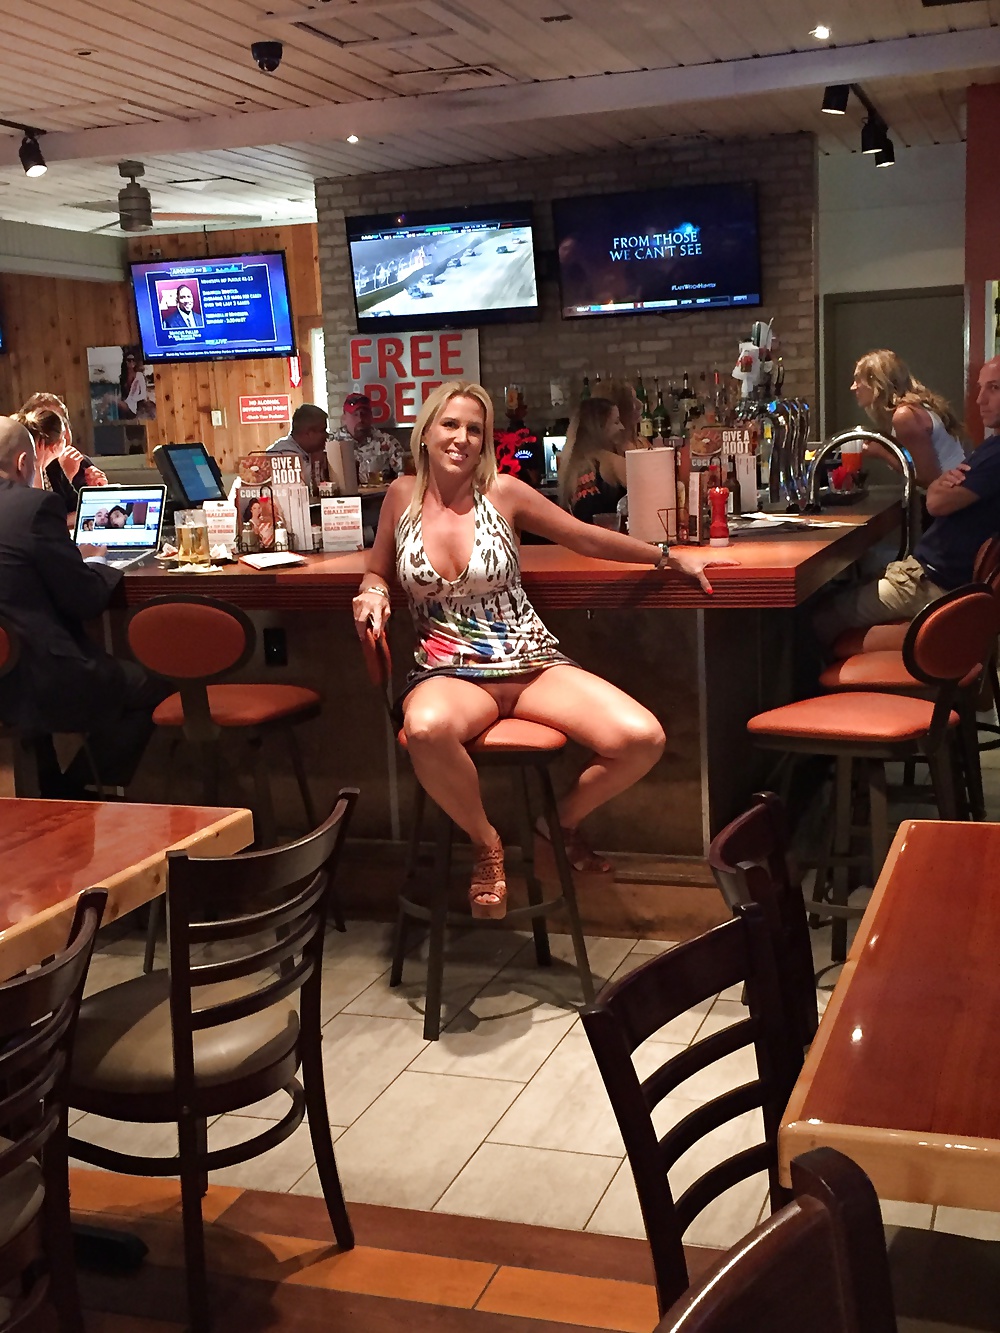 Watch Hooters now has a oyster bar - 2 Pics at xHamster.com! xHamster is th...